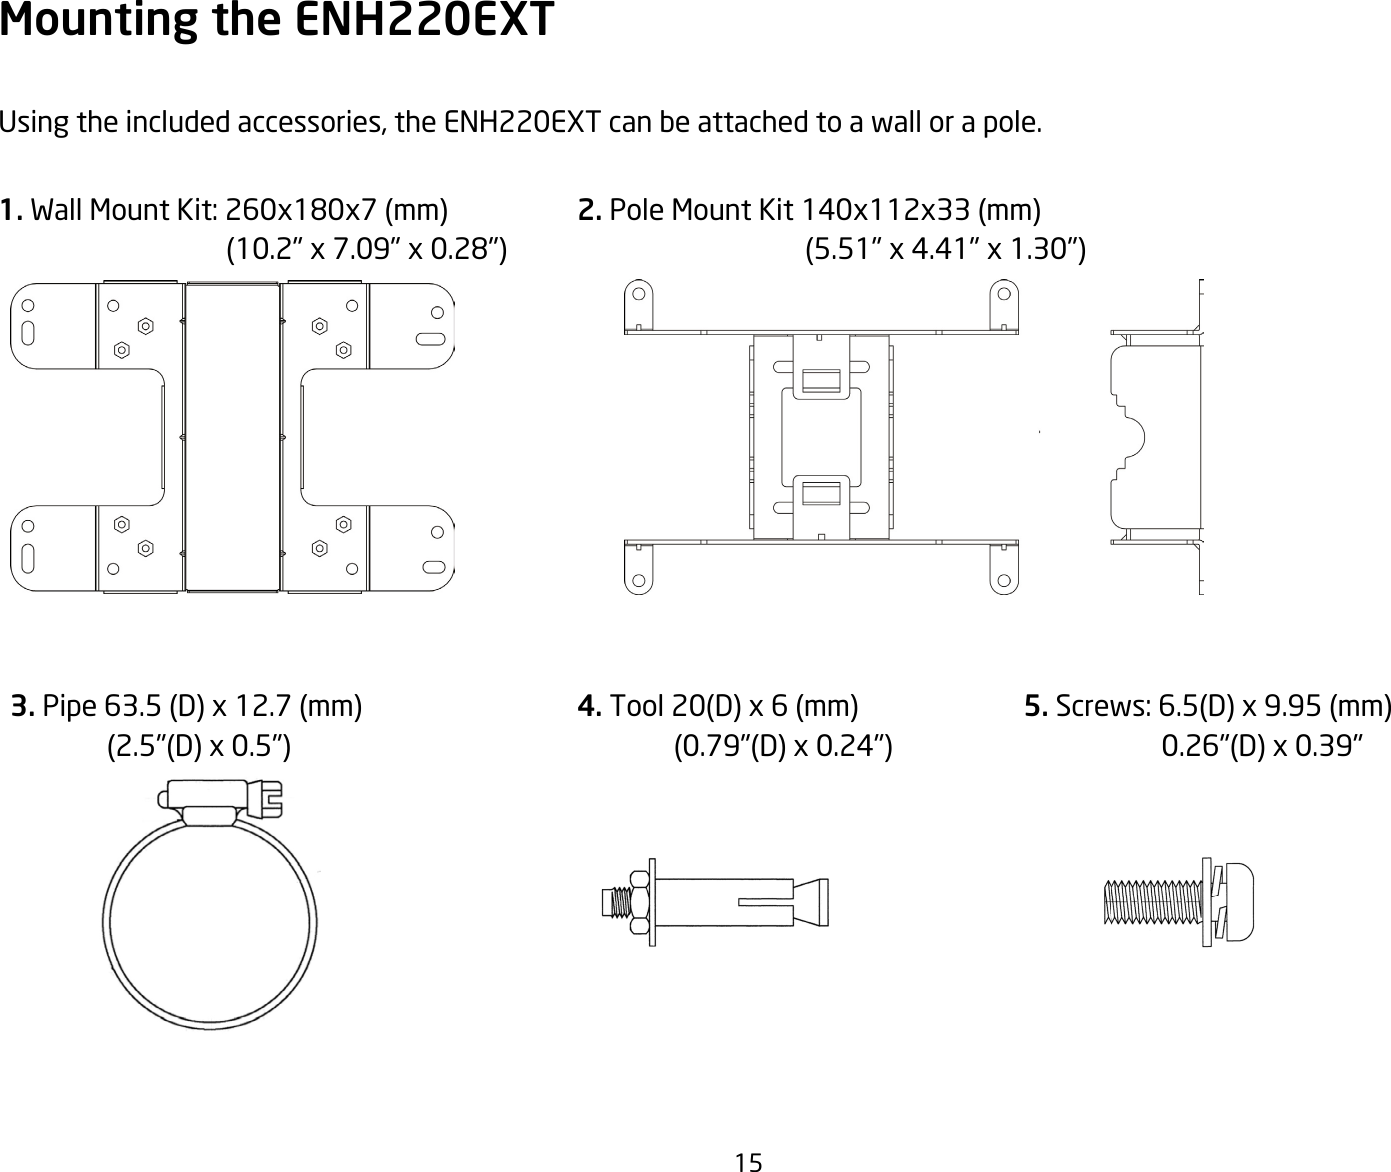 15Mounting the ENH220EXTUsing the included accessories, the ENH220EXT can be attached to a wall or a pole.1. Wall Mount Kit: 260x180x7(mm)(10.2&quot;x7.09&quot;x0.28&quot;)2. PoleMountKit140x112x33(mm)(5.51&quot;x4.41&quot;x1.30&quot;)3.Pipe63.5(D)x12.7(mm)(2.5&quot;(D)x0.5&quot;)4. Tool20(D)x6(mm)(0.79&quot;(D)x0.24&quot;)5. Screws:6.5(D)x9.95(mm)0.26&quot;(D)x0.39&quot;